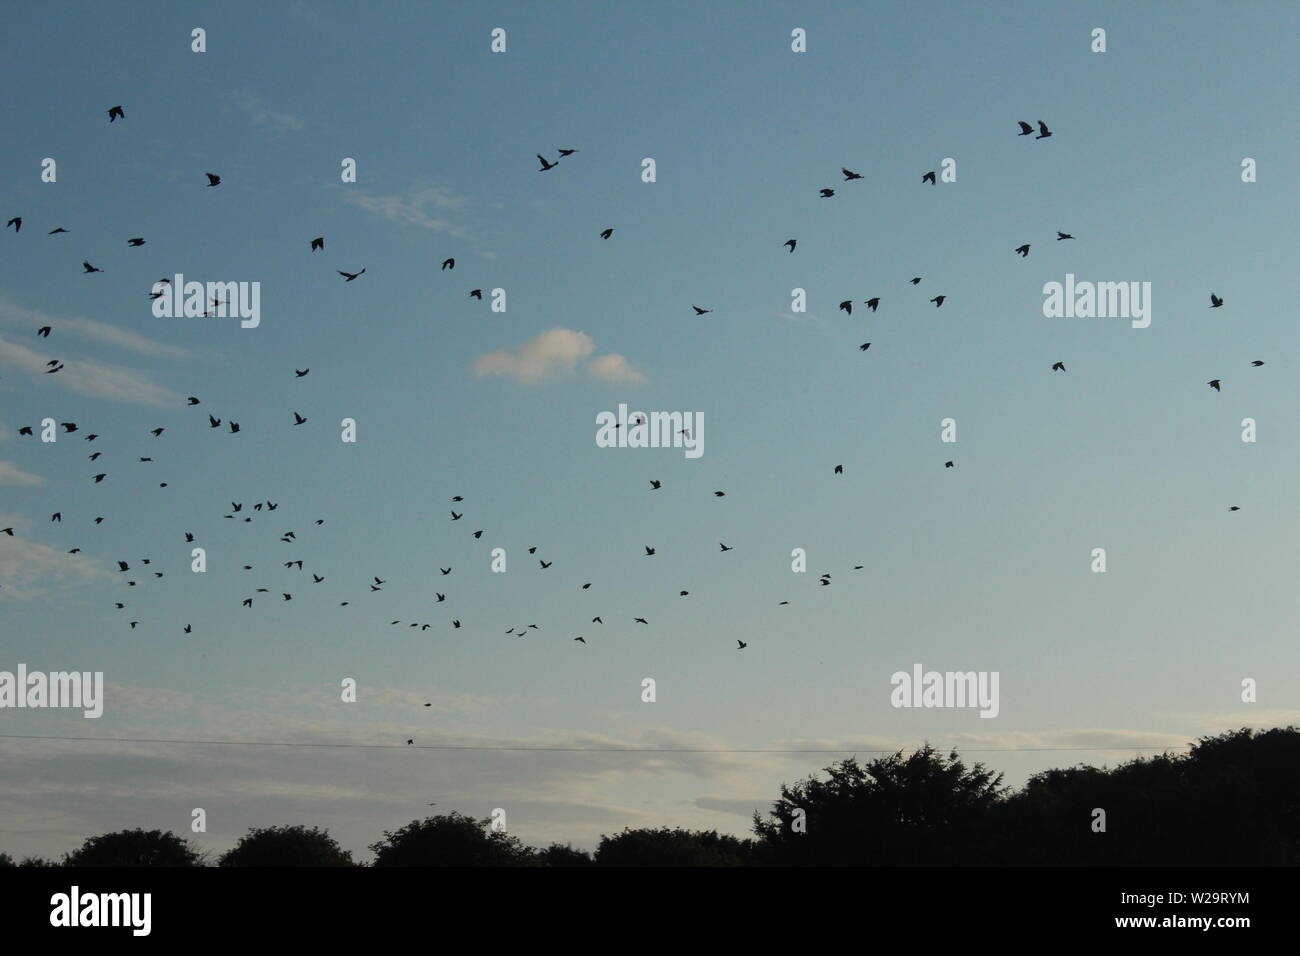 Image of a flock of black birds flying through a clear, blue sky above trees Stock Photo